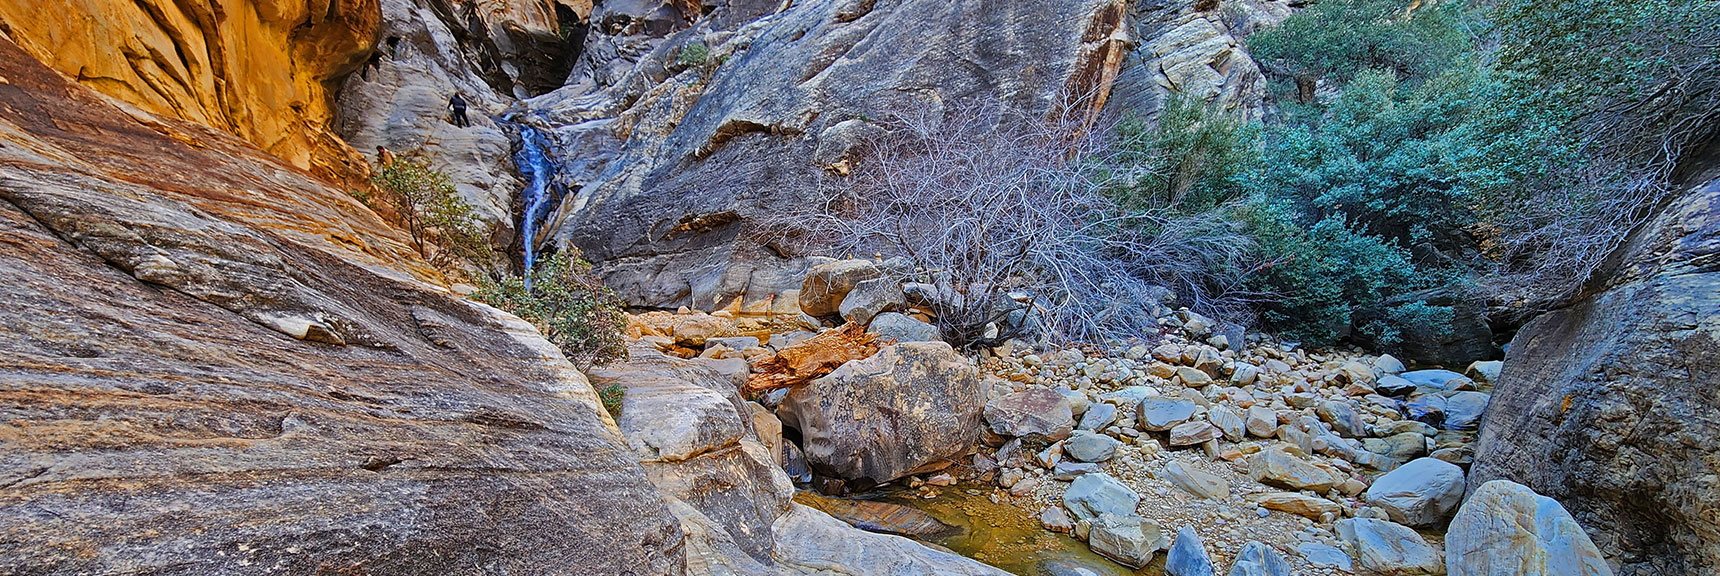 Closer View of Lower Waterfall from Approach Ledge. Note Hikers Left of Fall | Ice Box Canyon | Red Rock Canyon NCA, Nevada | Las Vegas Area Trails | David Smith